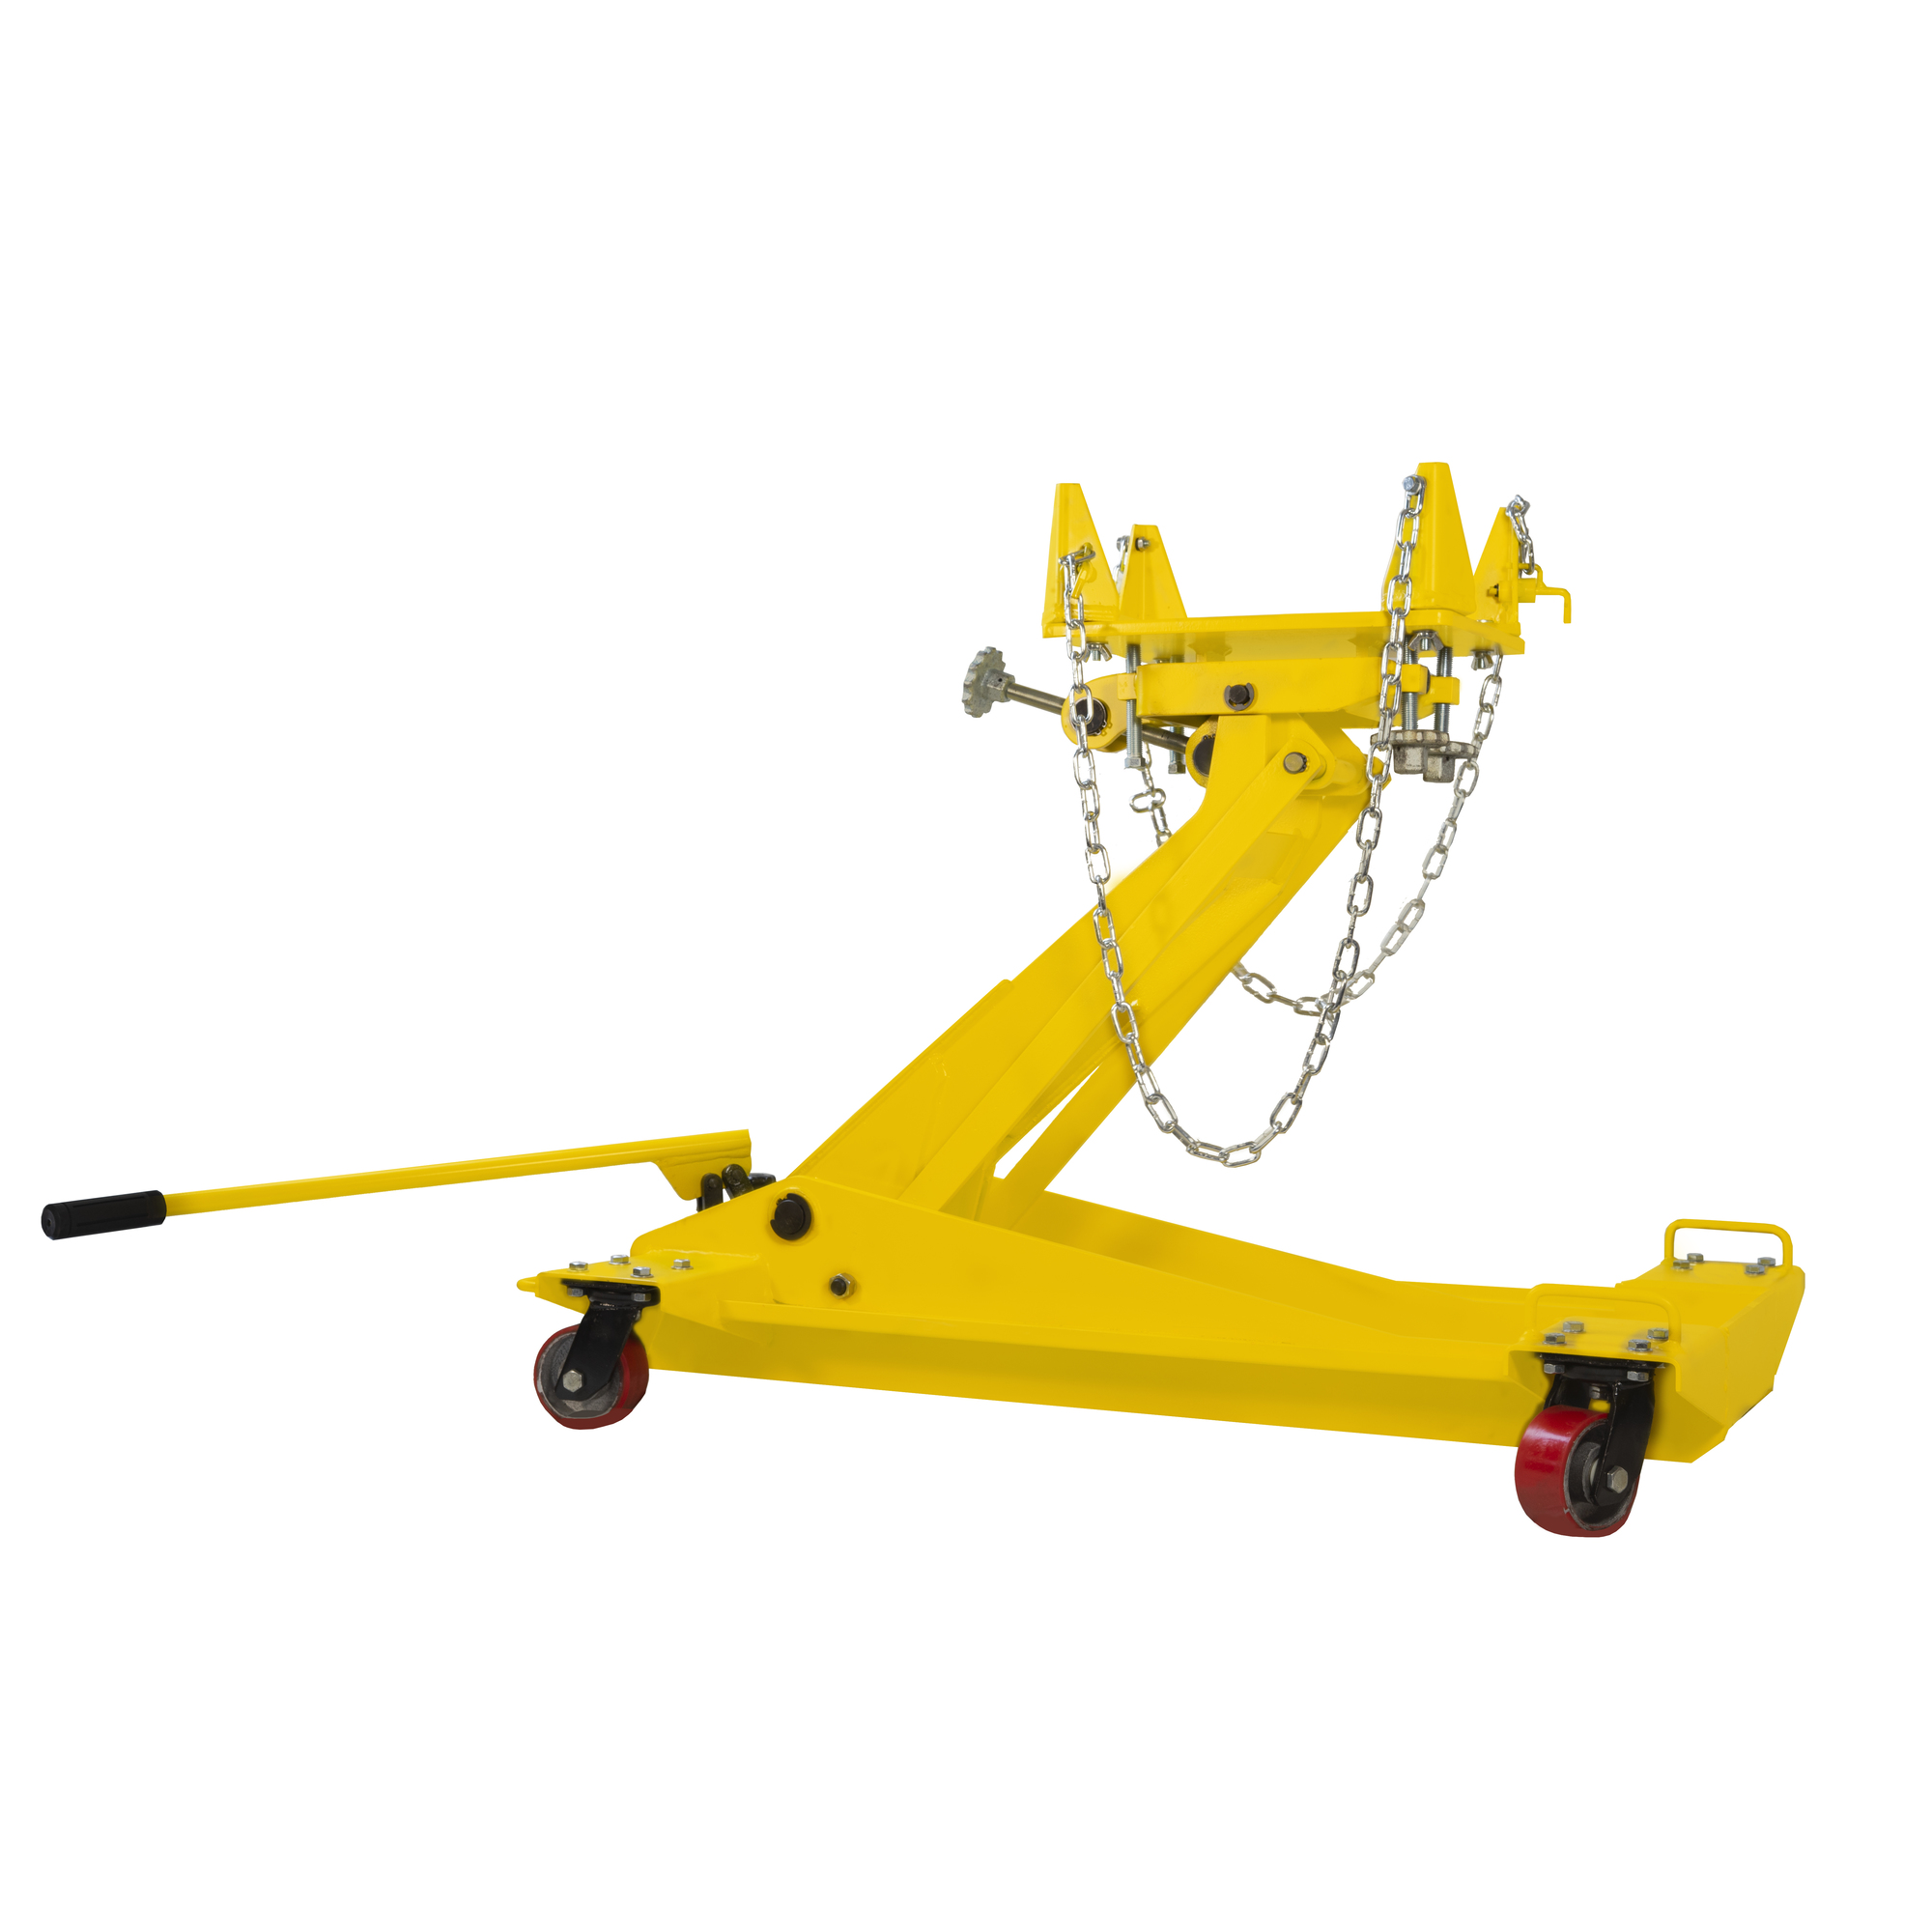 ESCO, Yellow Jackit 2.2 Ton Transmission Jack, Lift Capacity 4400 lb, Max. Lift Height 35 in, MInch Lift Height 10 in, Model 10812